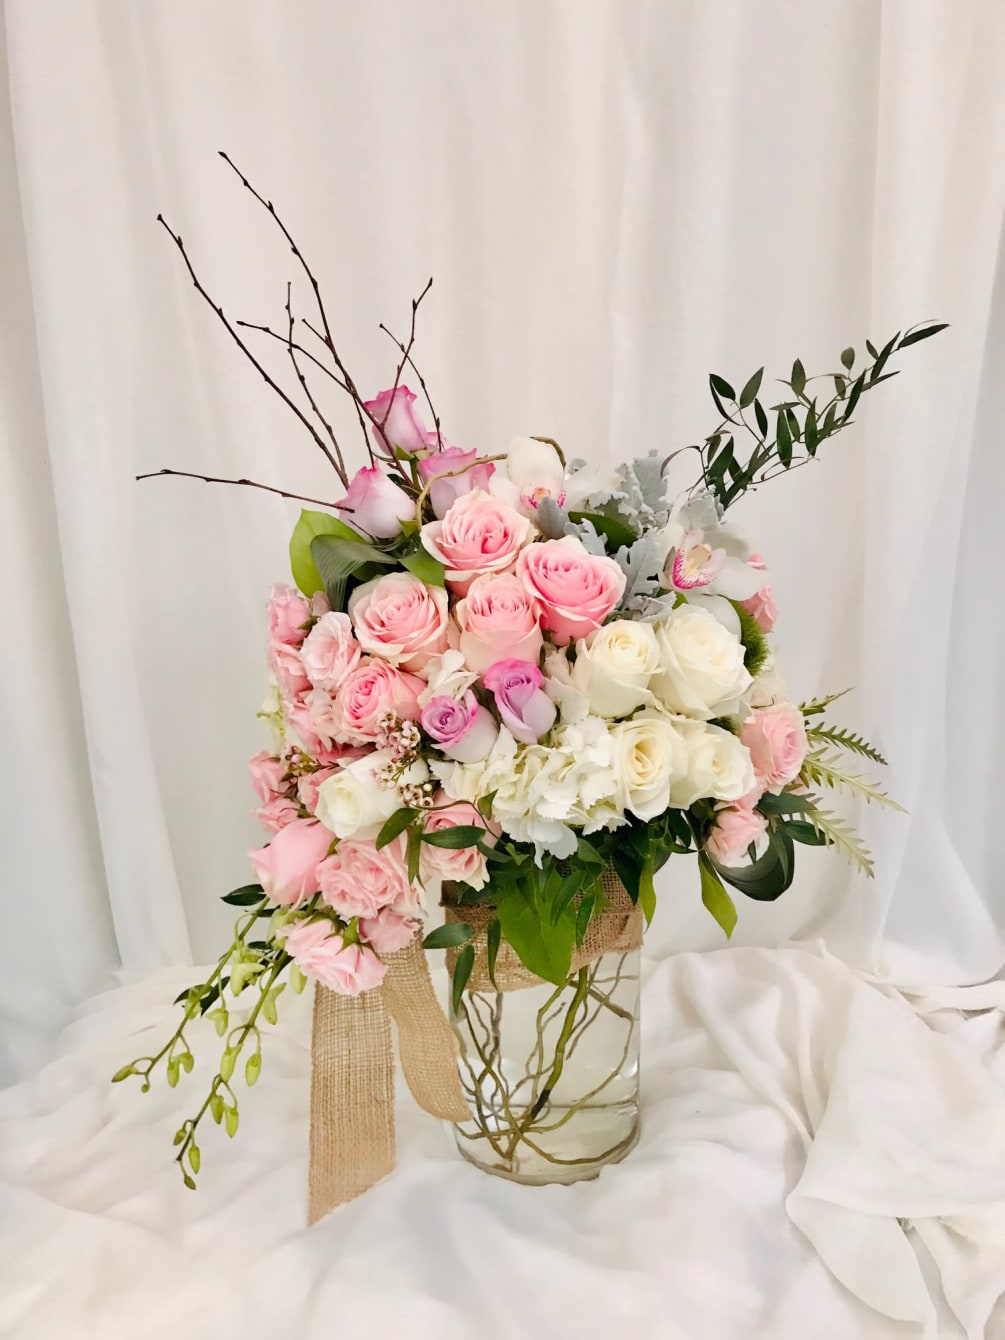 This grand arrangement is full of life. It is an elegant piece